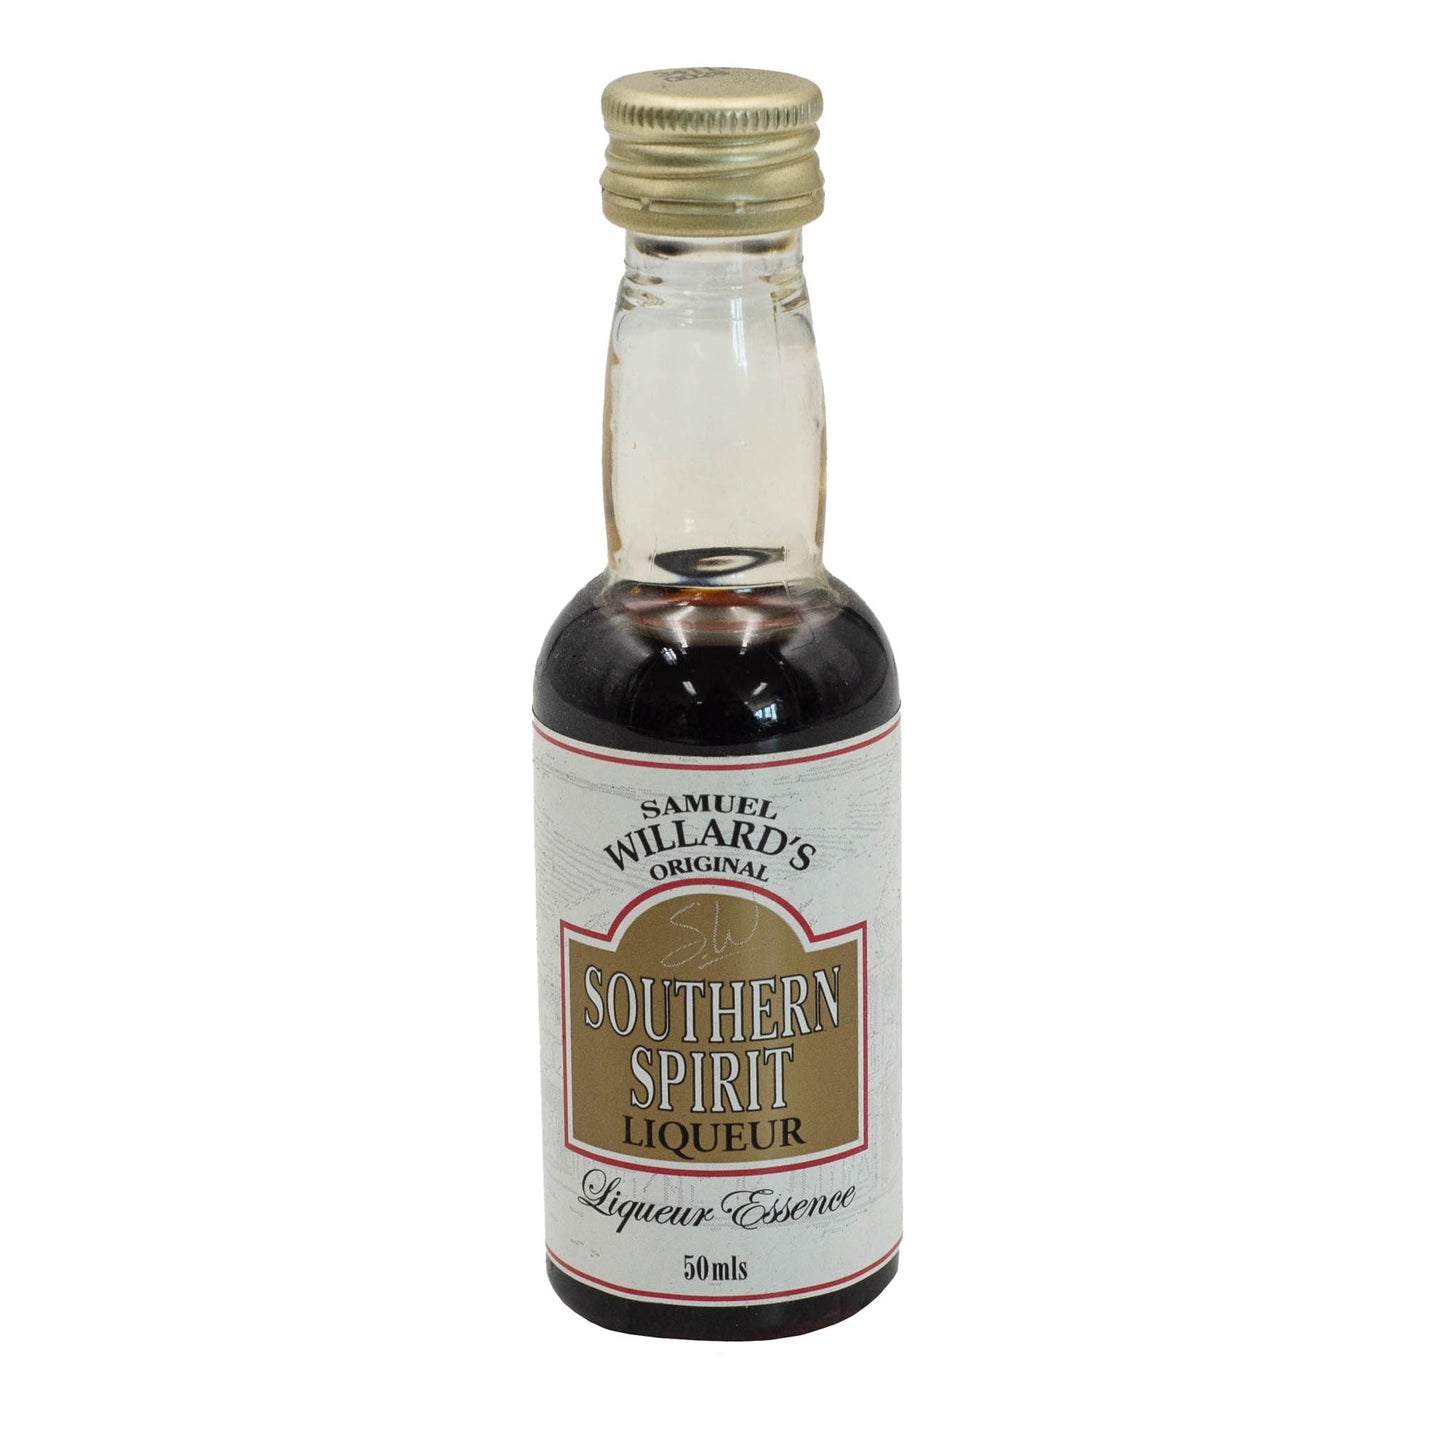 Samuel Willards Southern Spirit Liqueur essence makes a Southern Comfort style drink. Will make 1125mL of finished product from each 50mL bottle